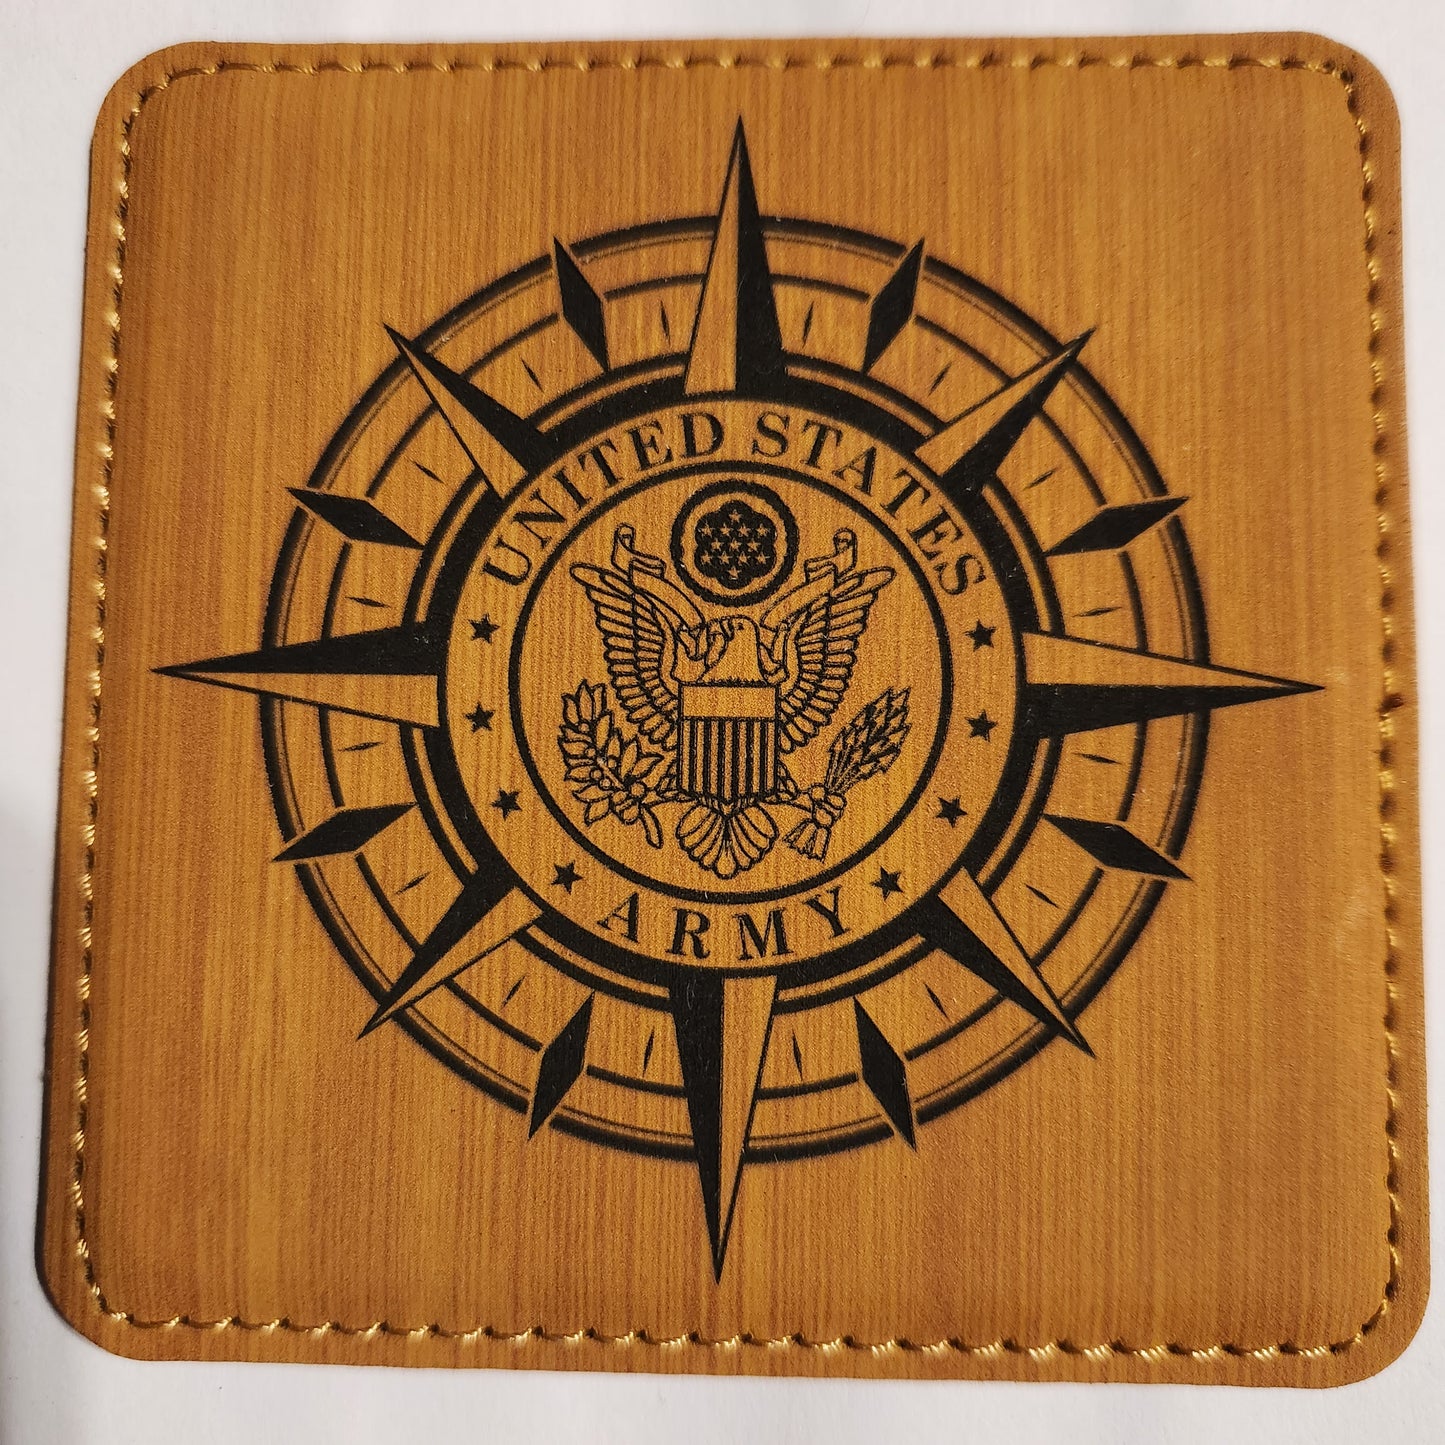 Laser engraved leather coasters